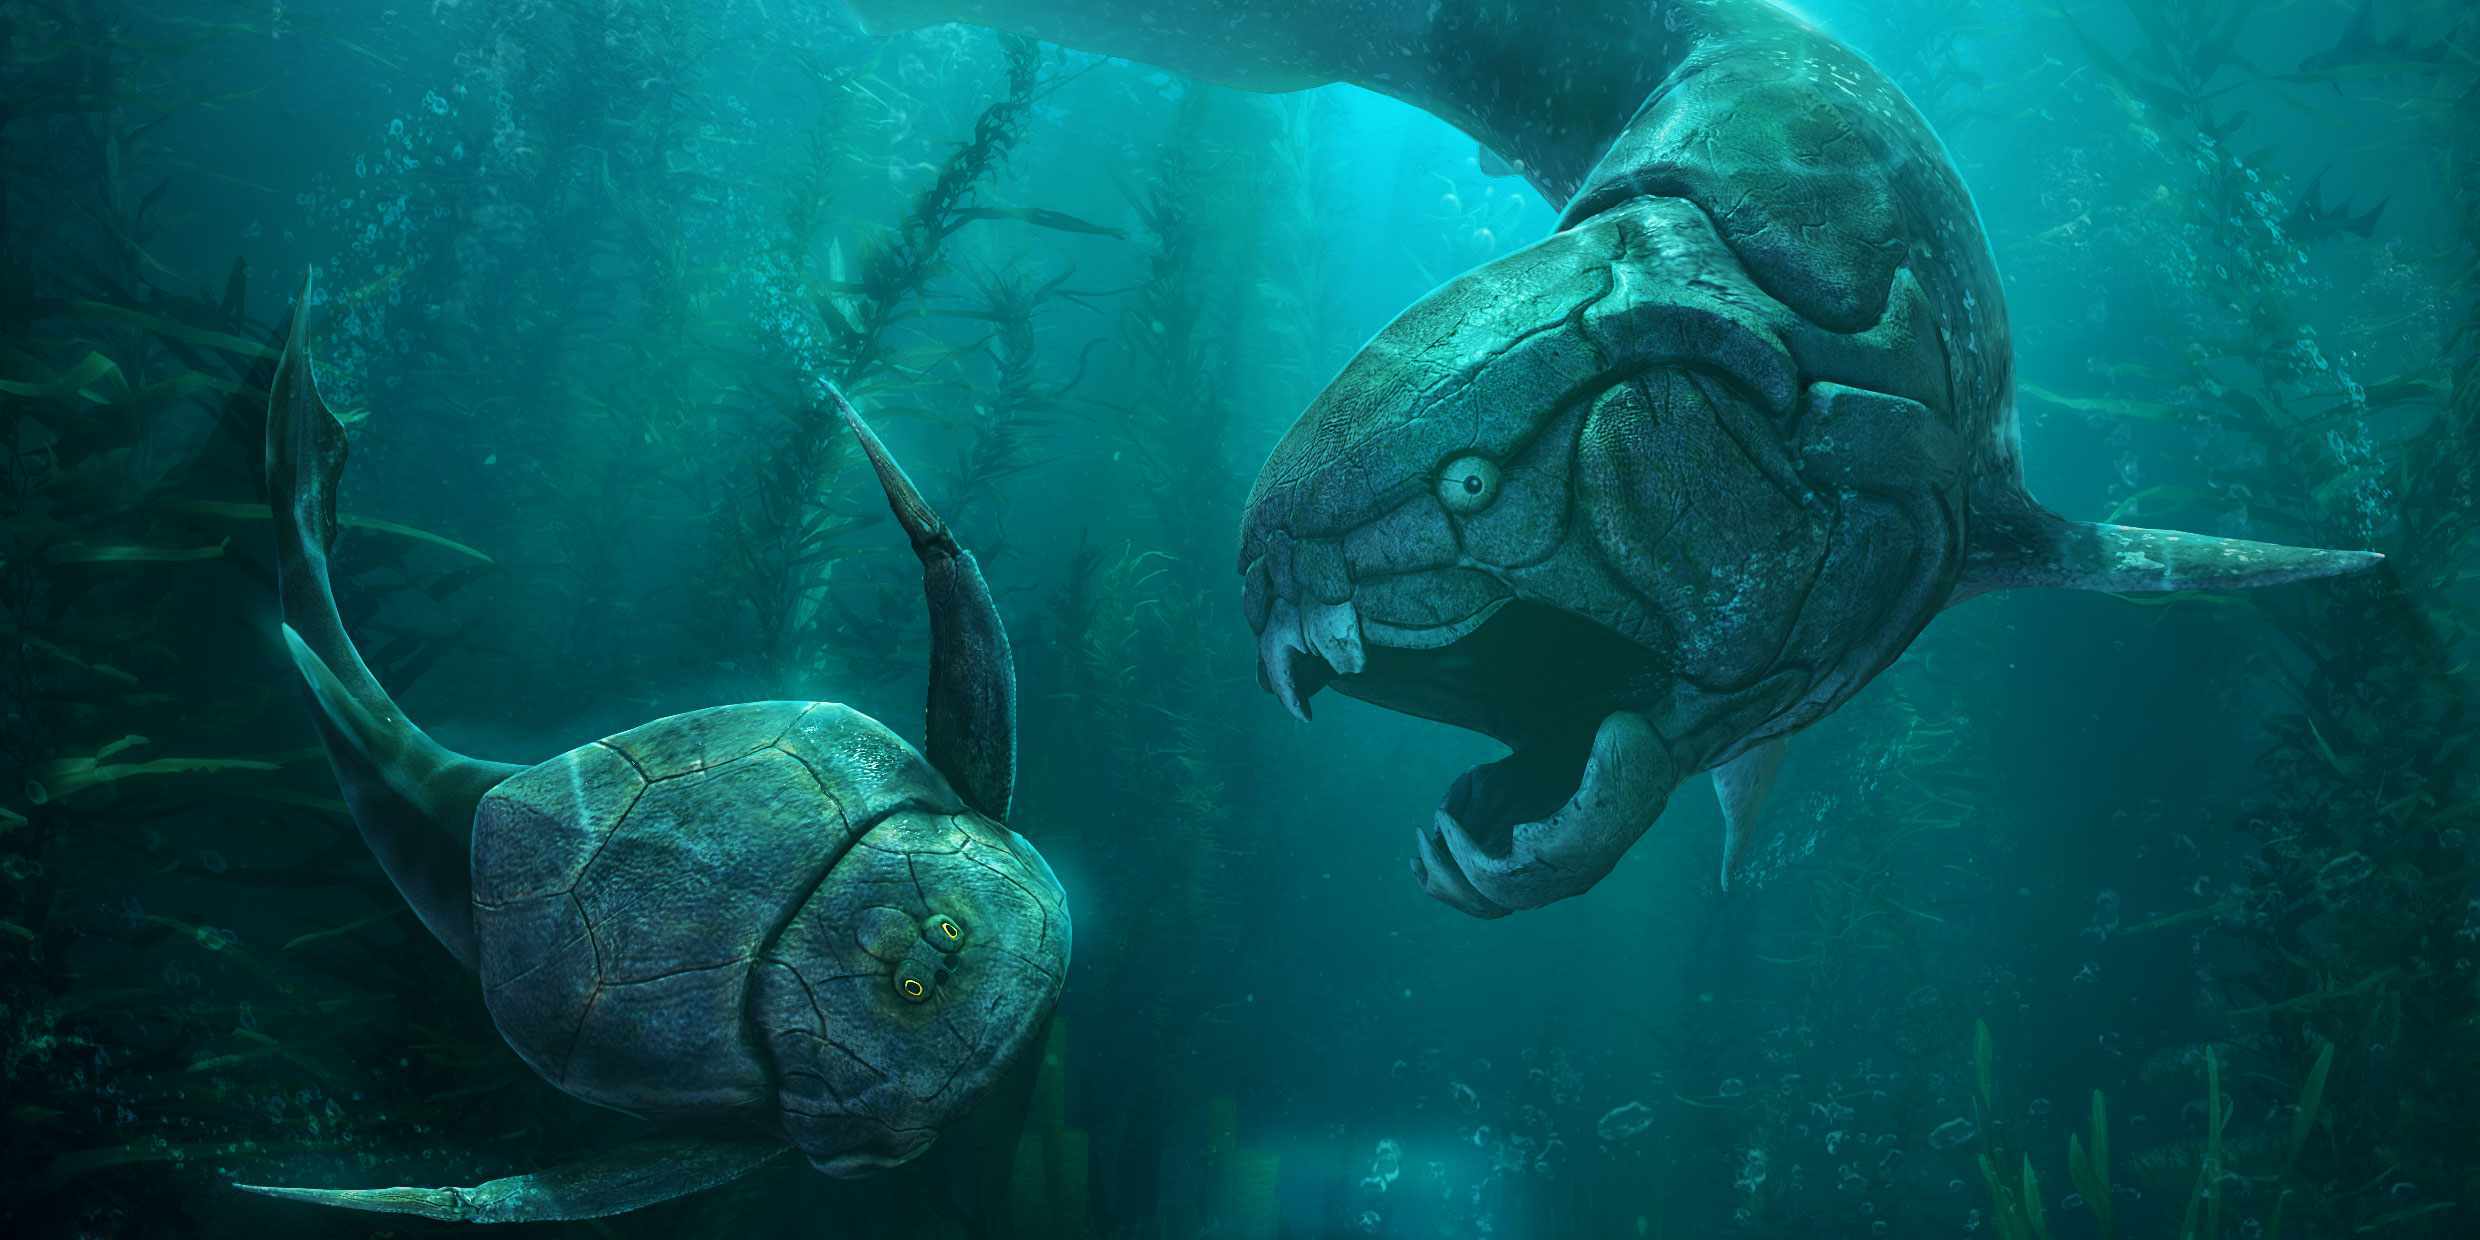 Devonian seas VR Experience Dunkleosteus and Bothriolepis